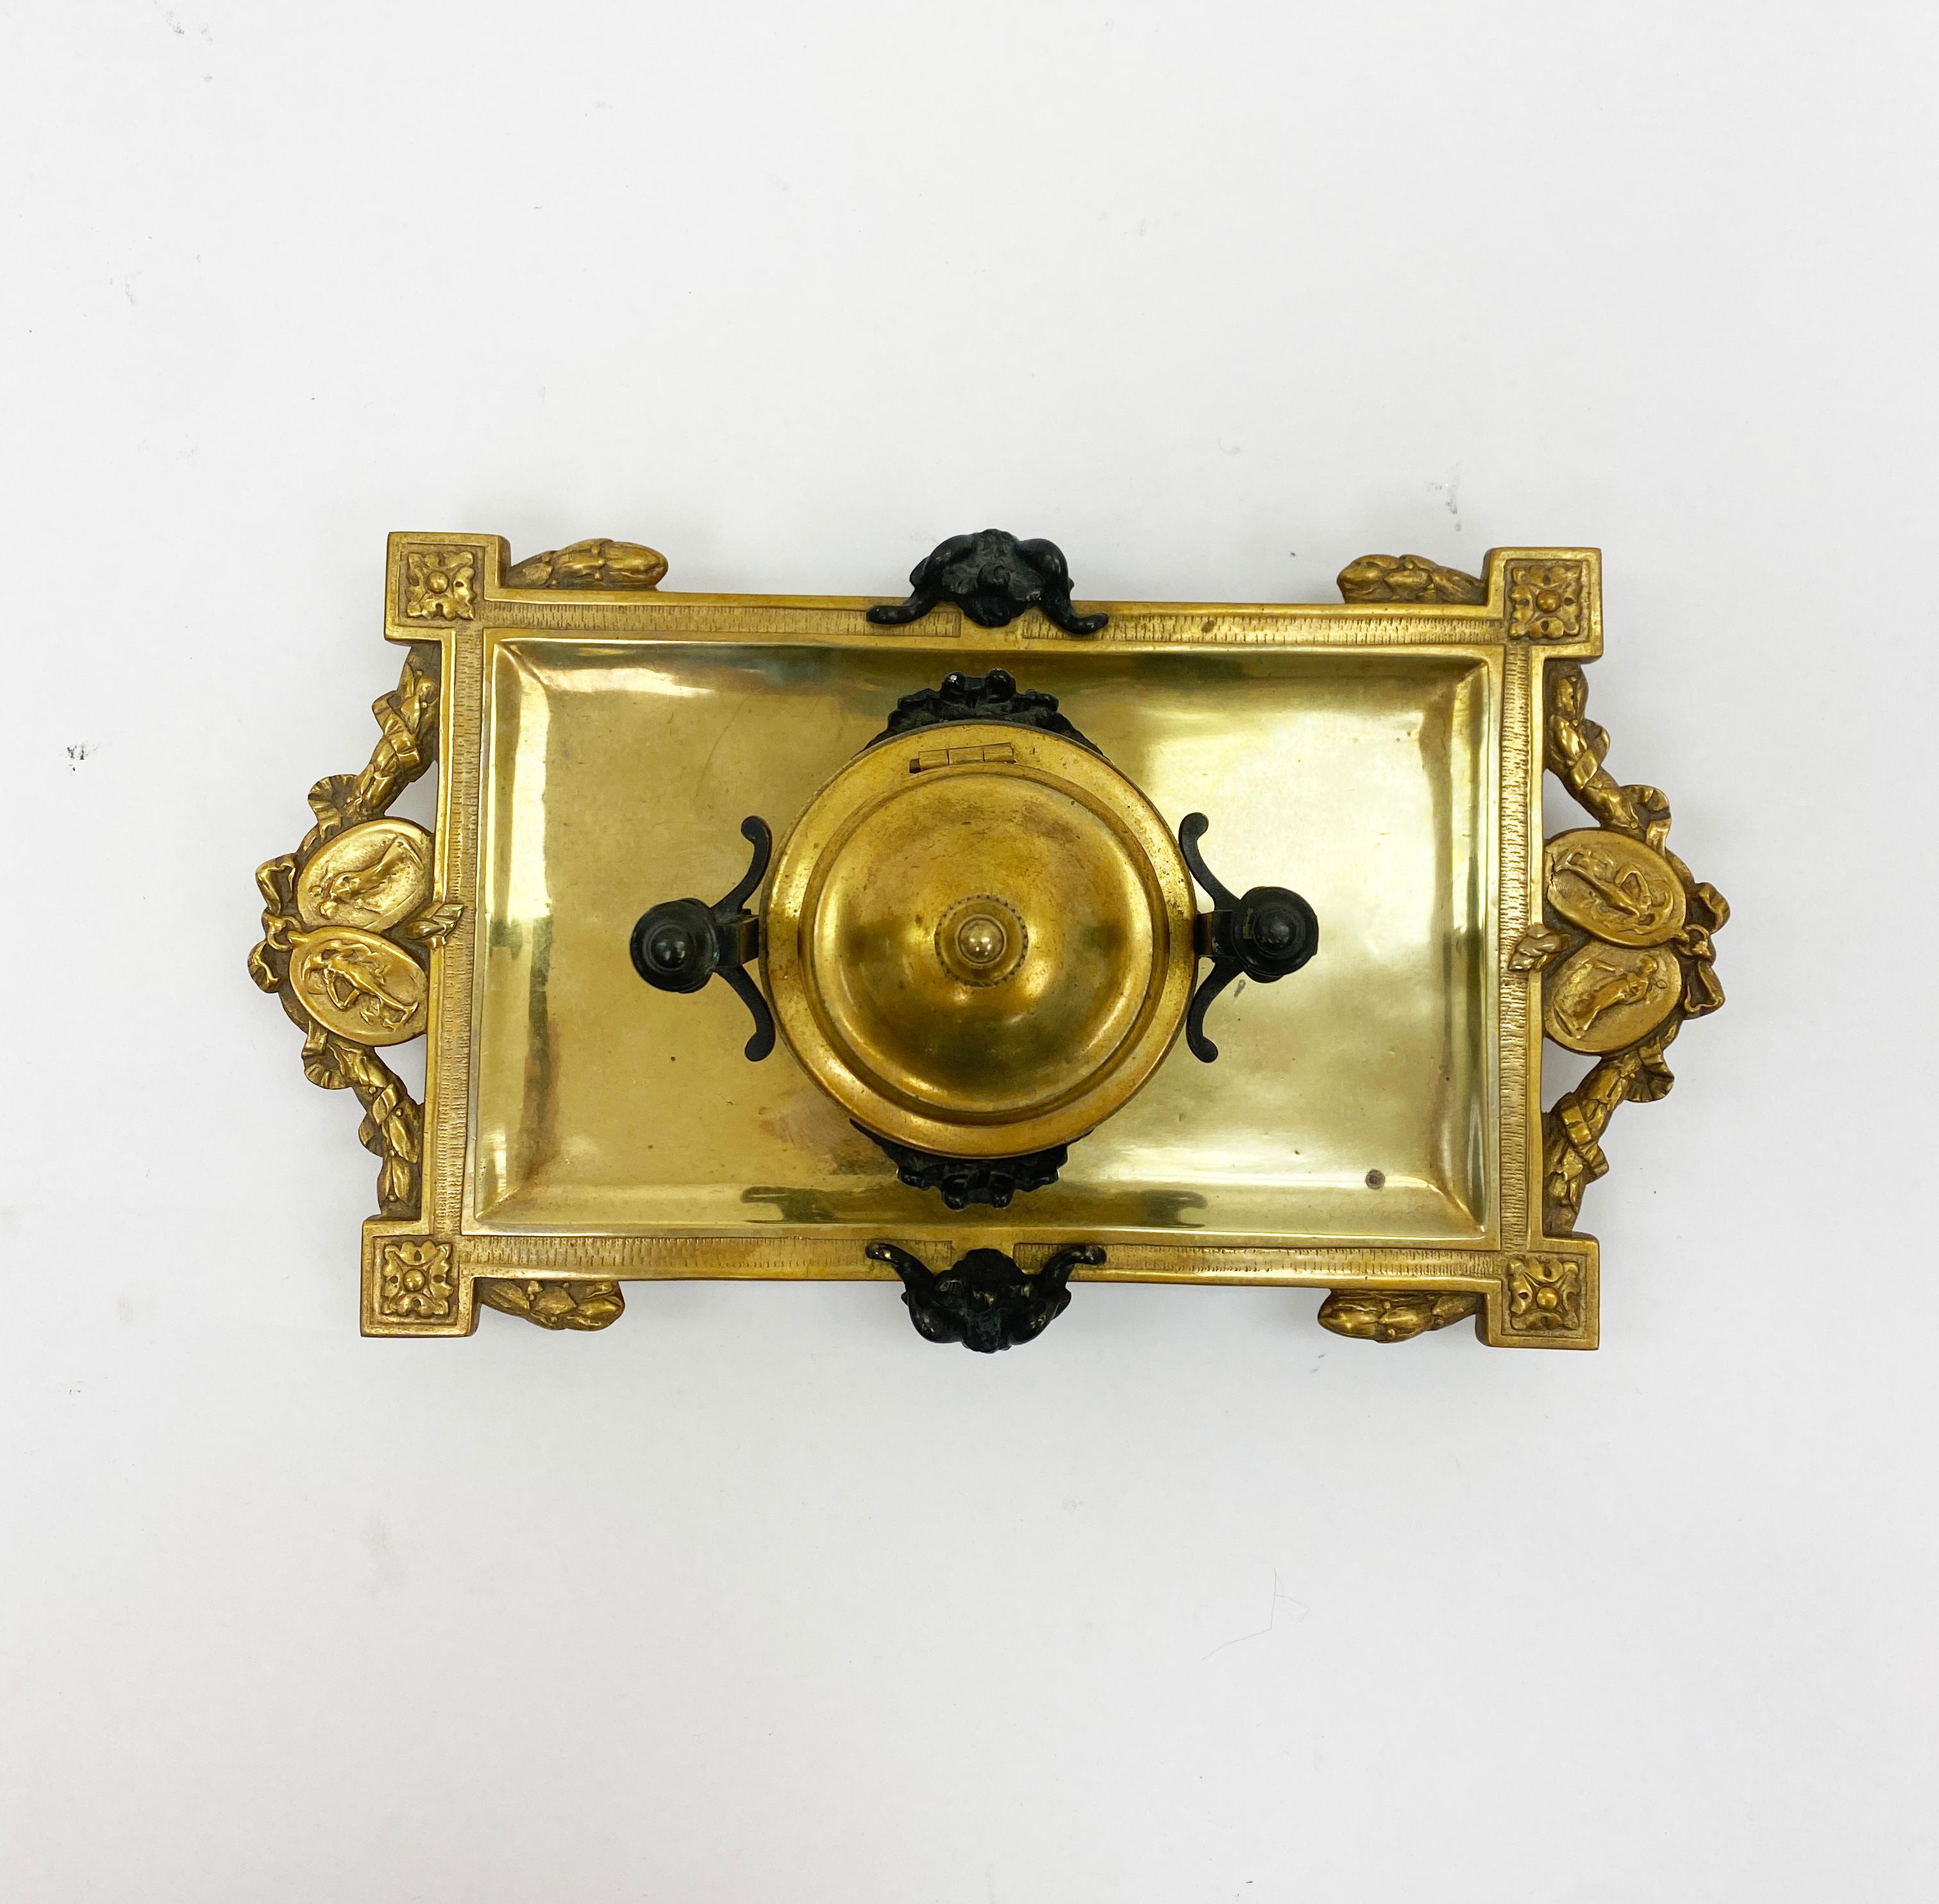 Bronze inkwell, circa 1790. Rectangular form with gilt bronze footed base with patinated dark bronze handles and mounts. Item has singular pot in the center of the tray. The floral designs and color scheme enhance the neoclassical style.